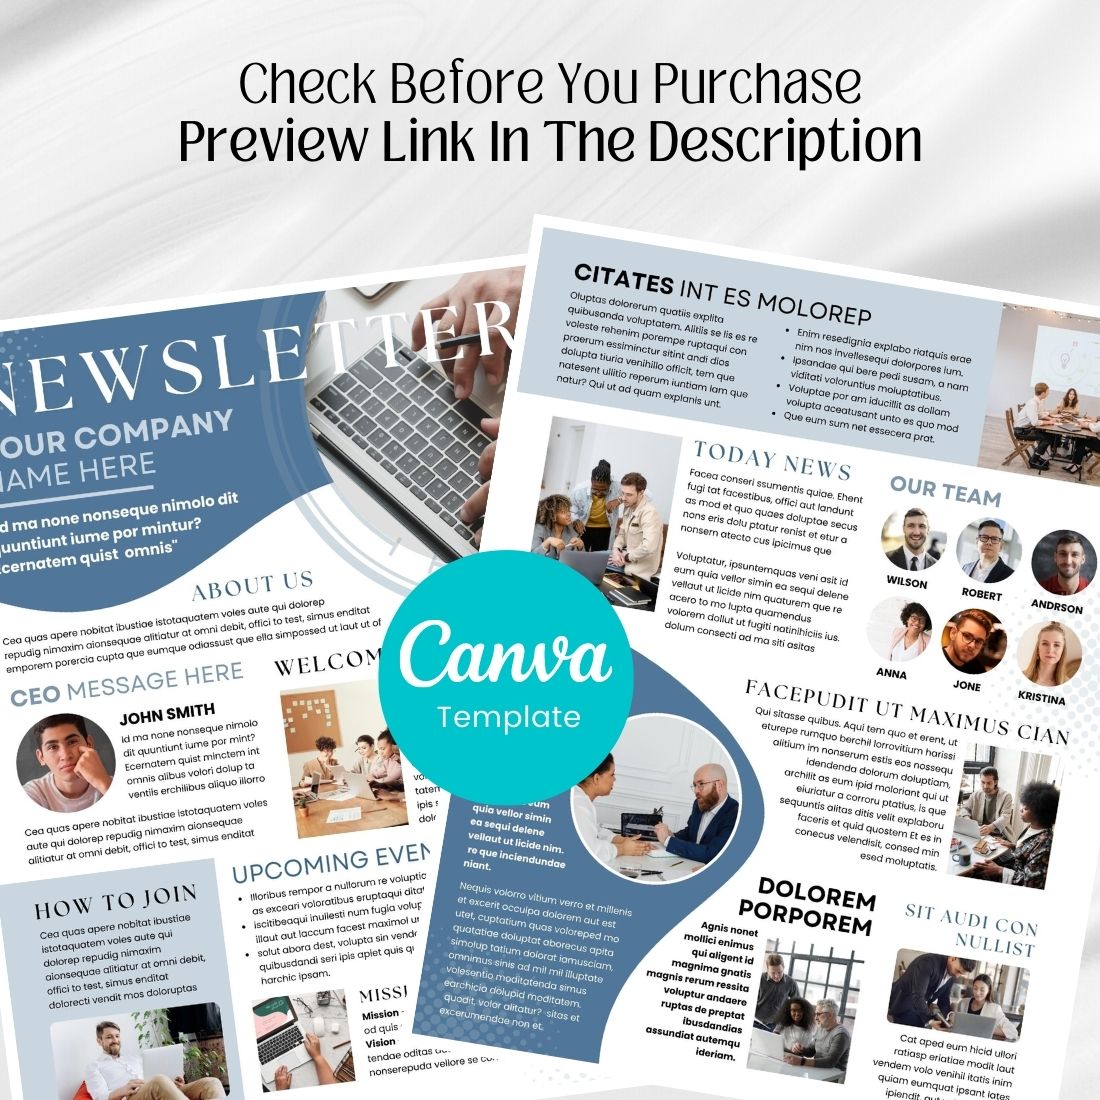 Download Canva Newsletter Template, Digital and Printable cover image.